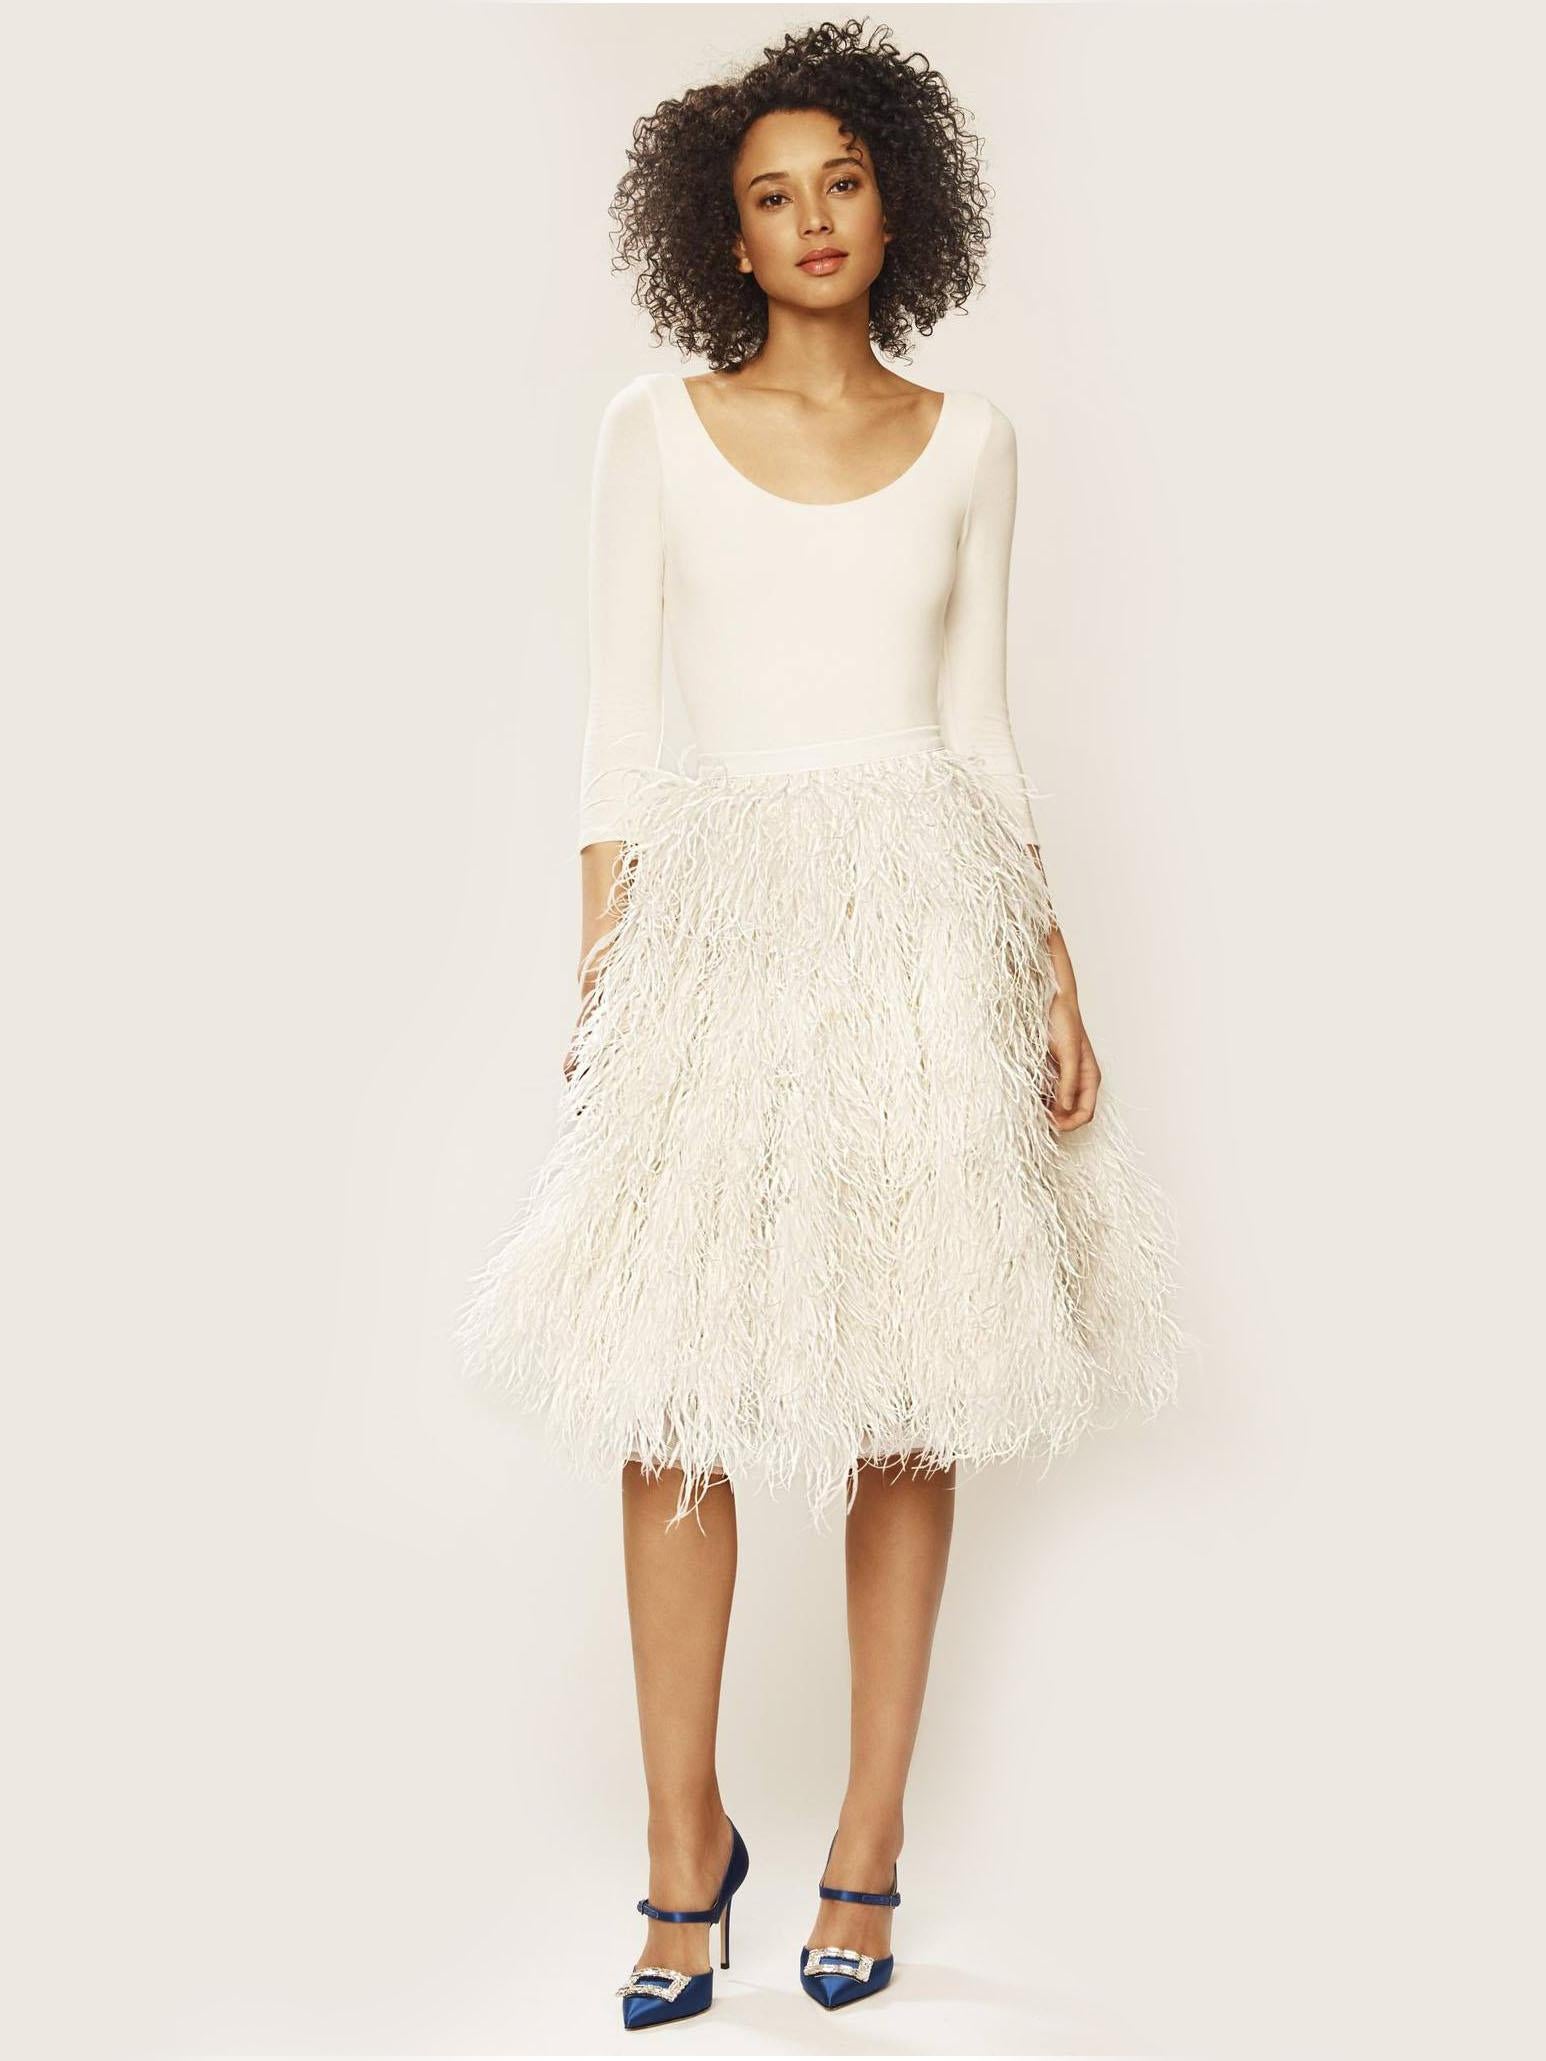 Feather skirt, £808